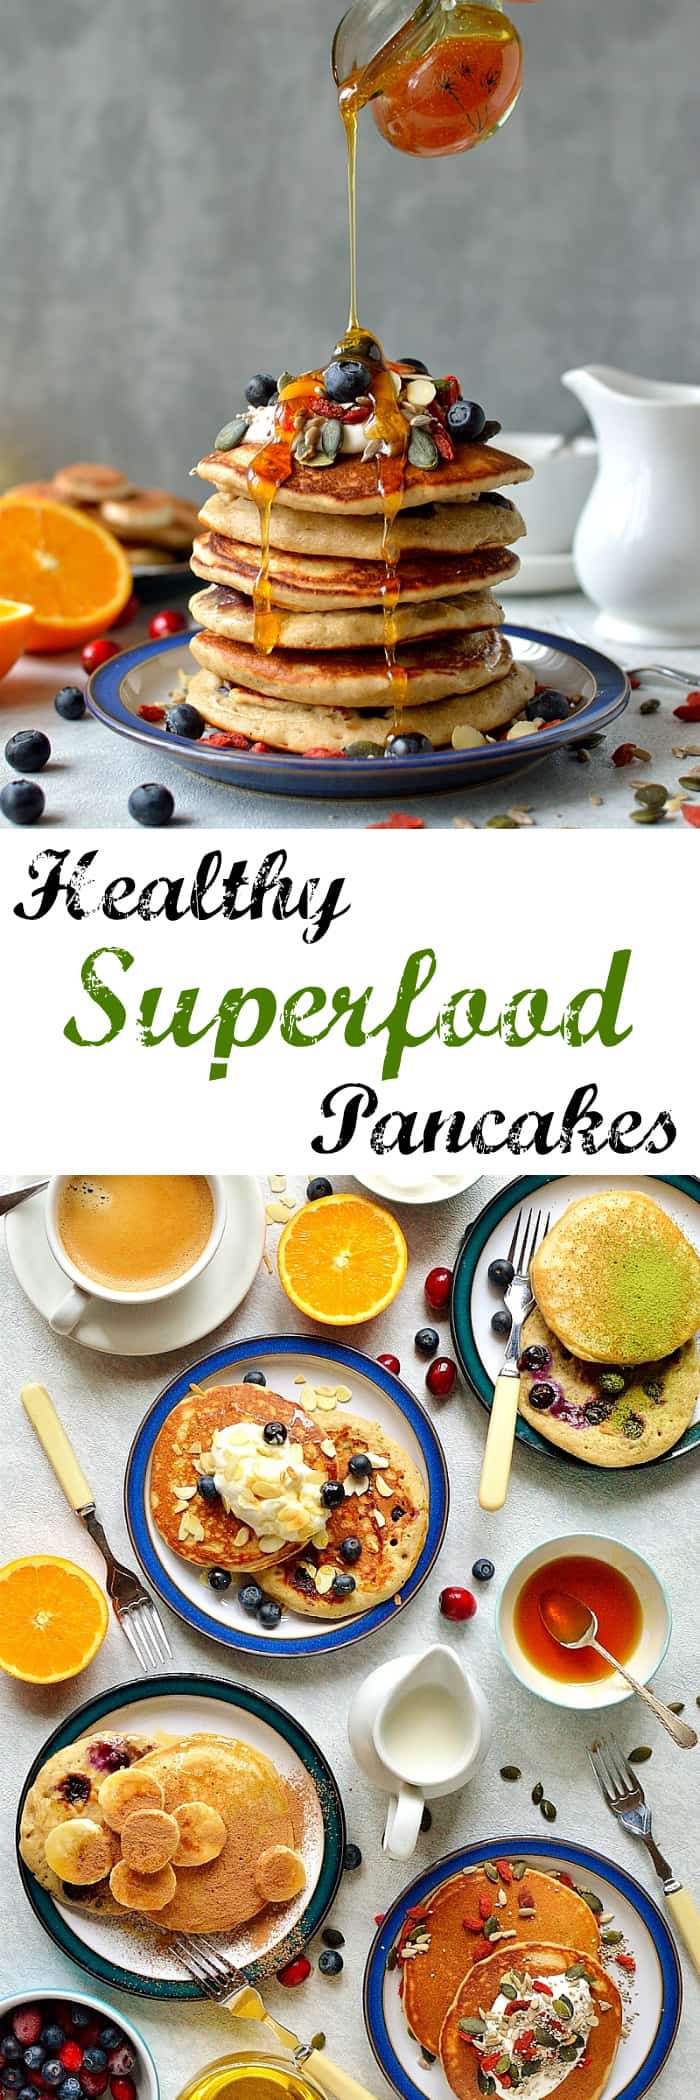 Healthy superfood pancakes - an indulgent breakfast that is packed full of nutritious ingredients, eating healthily doesn't need to be boring!